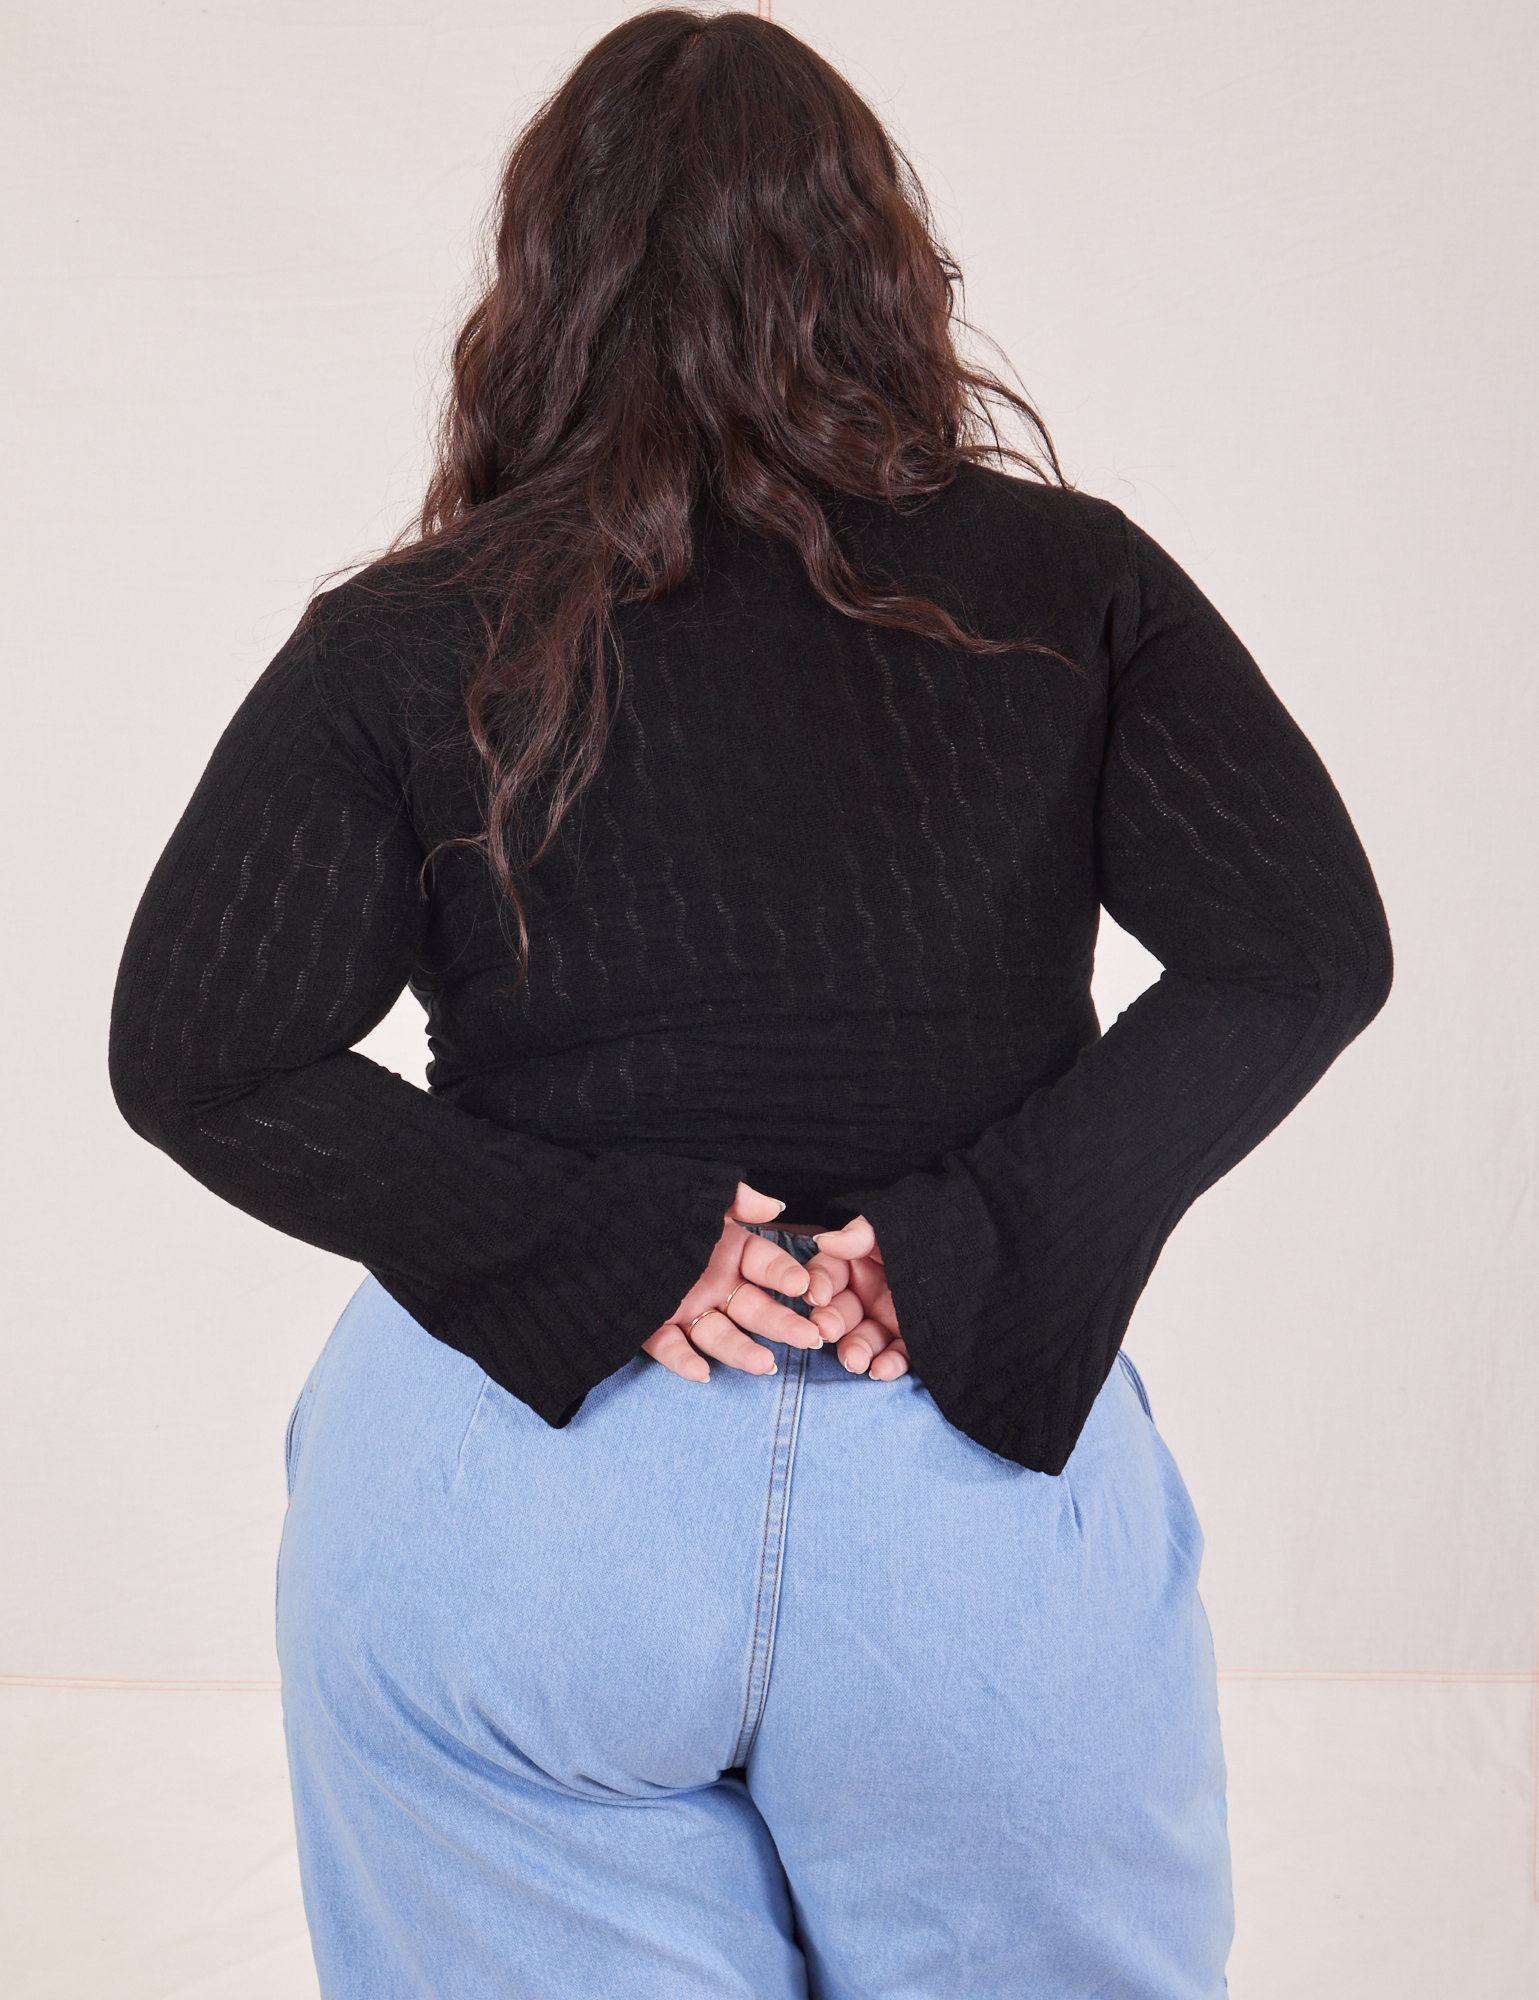 Back view of Bell Sleeve Top in Basic Black and light wash Trouser Jeans worn by Ashley